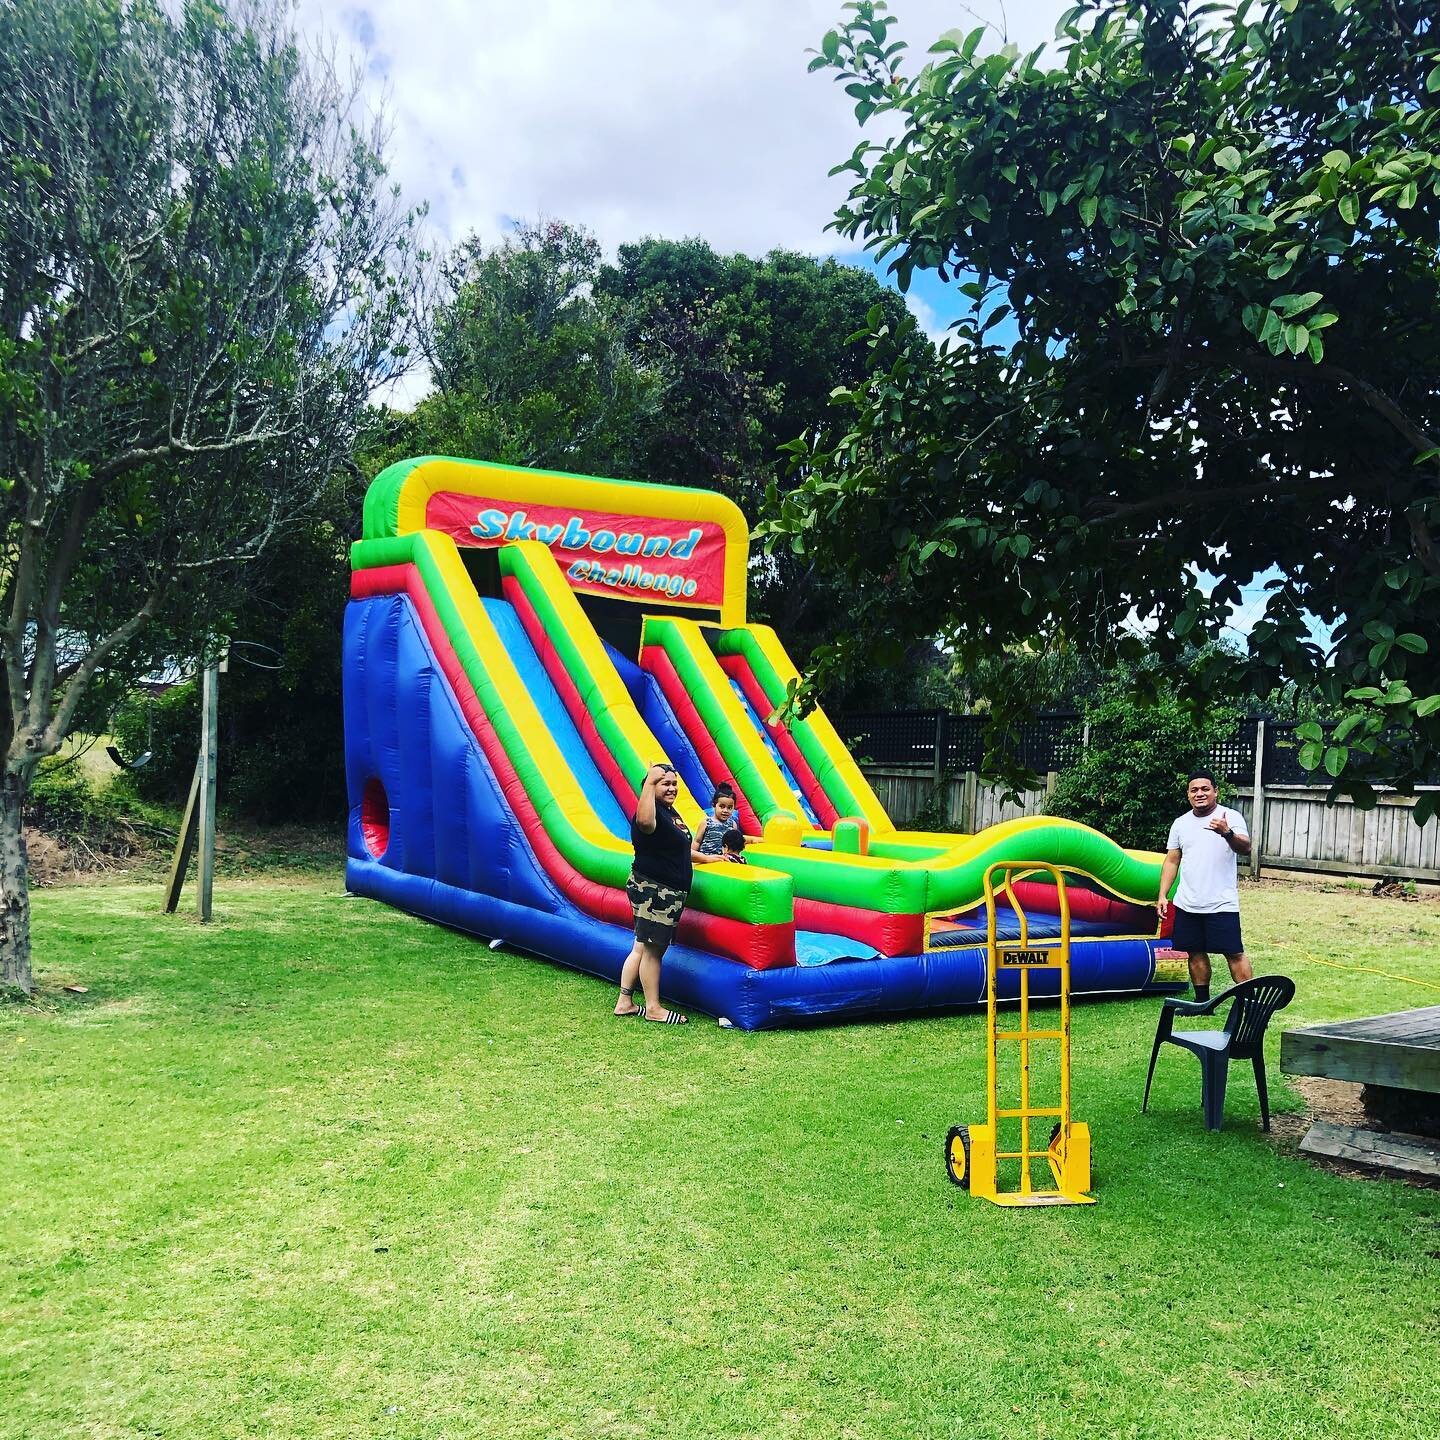 Bout to be a great weekend! 😍

#bouncycastle #cheapcastlecompany